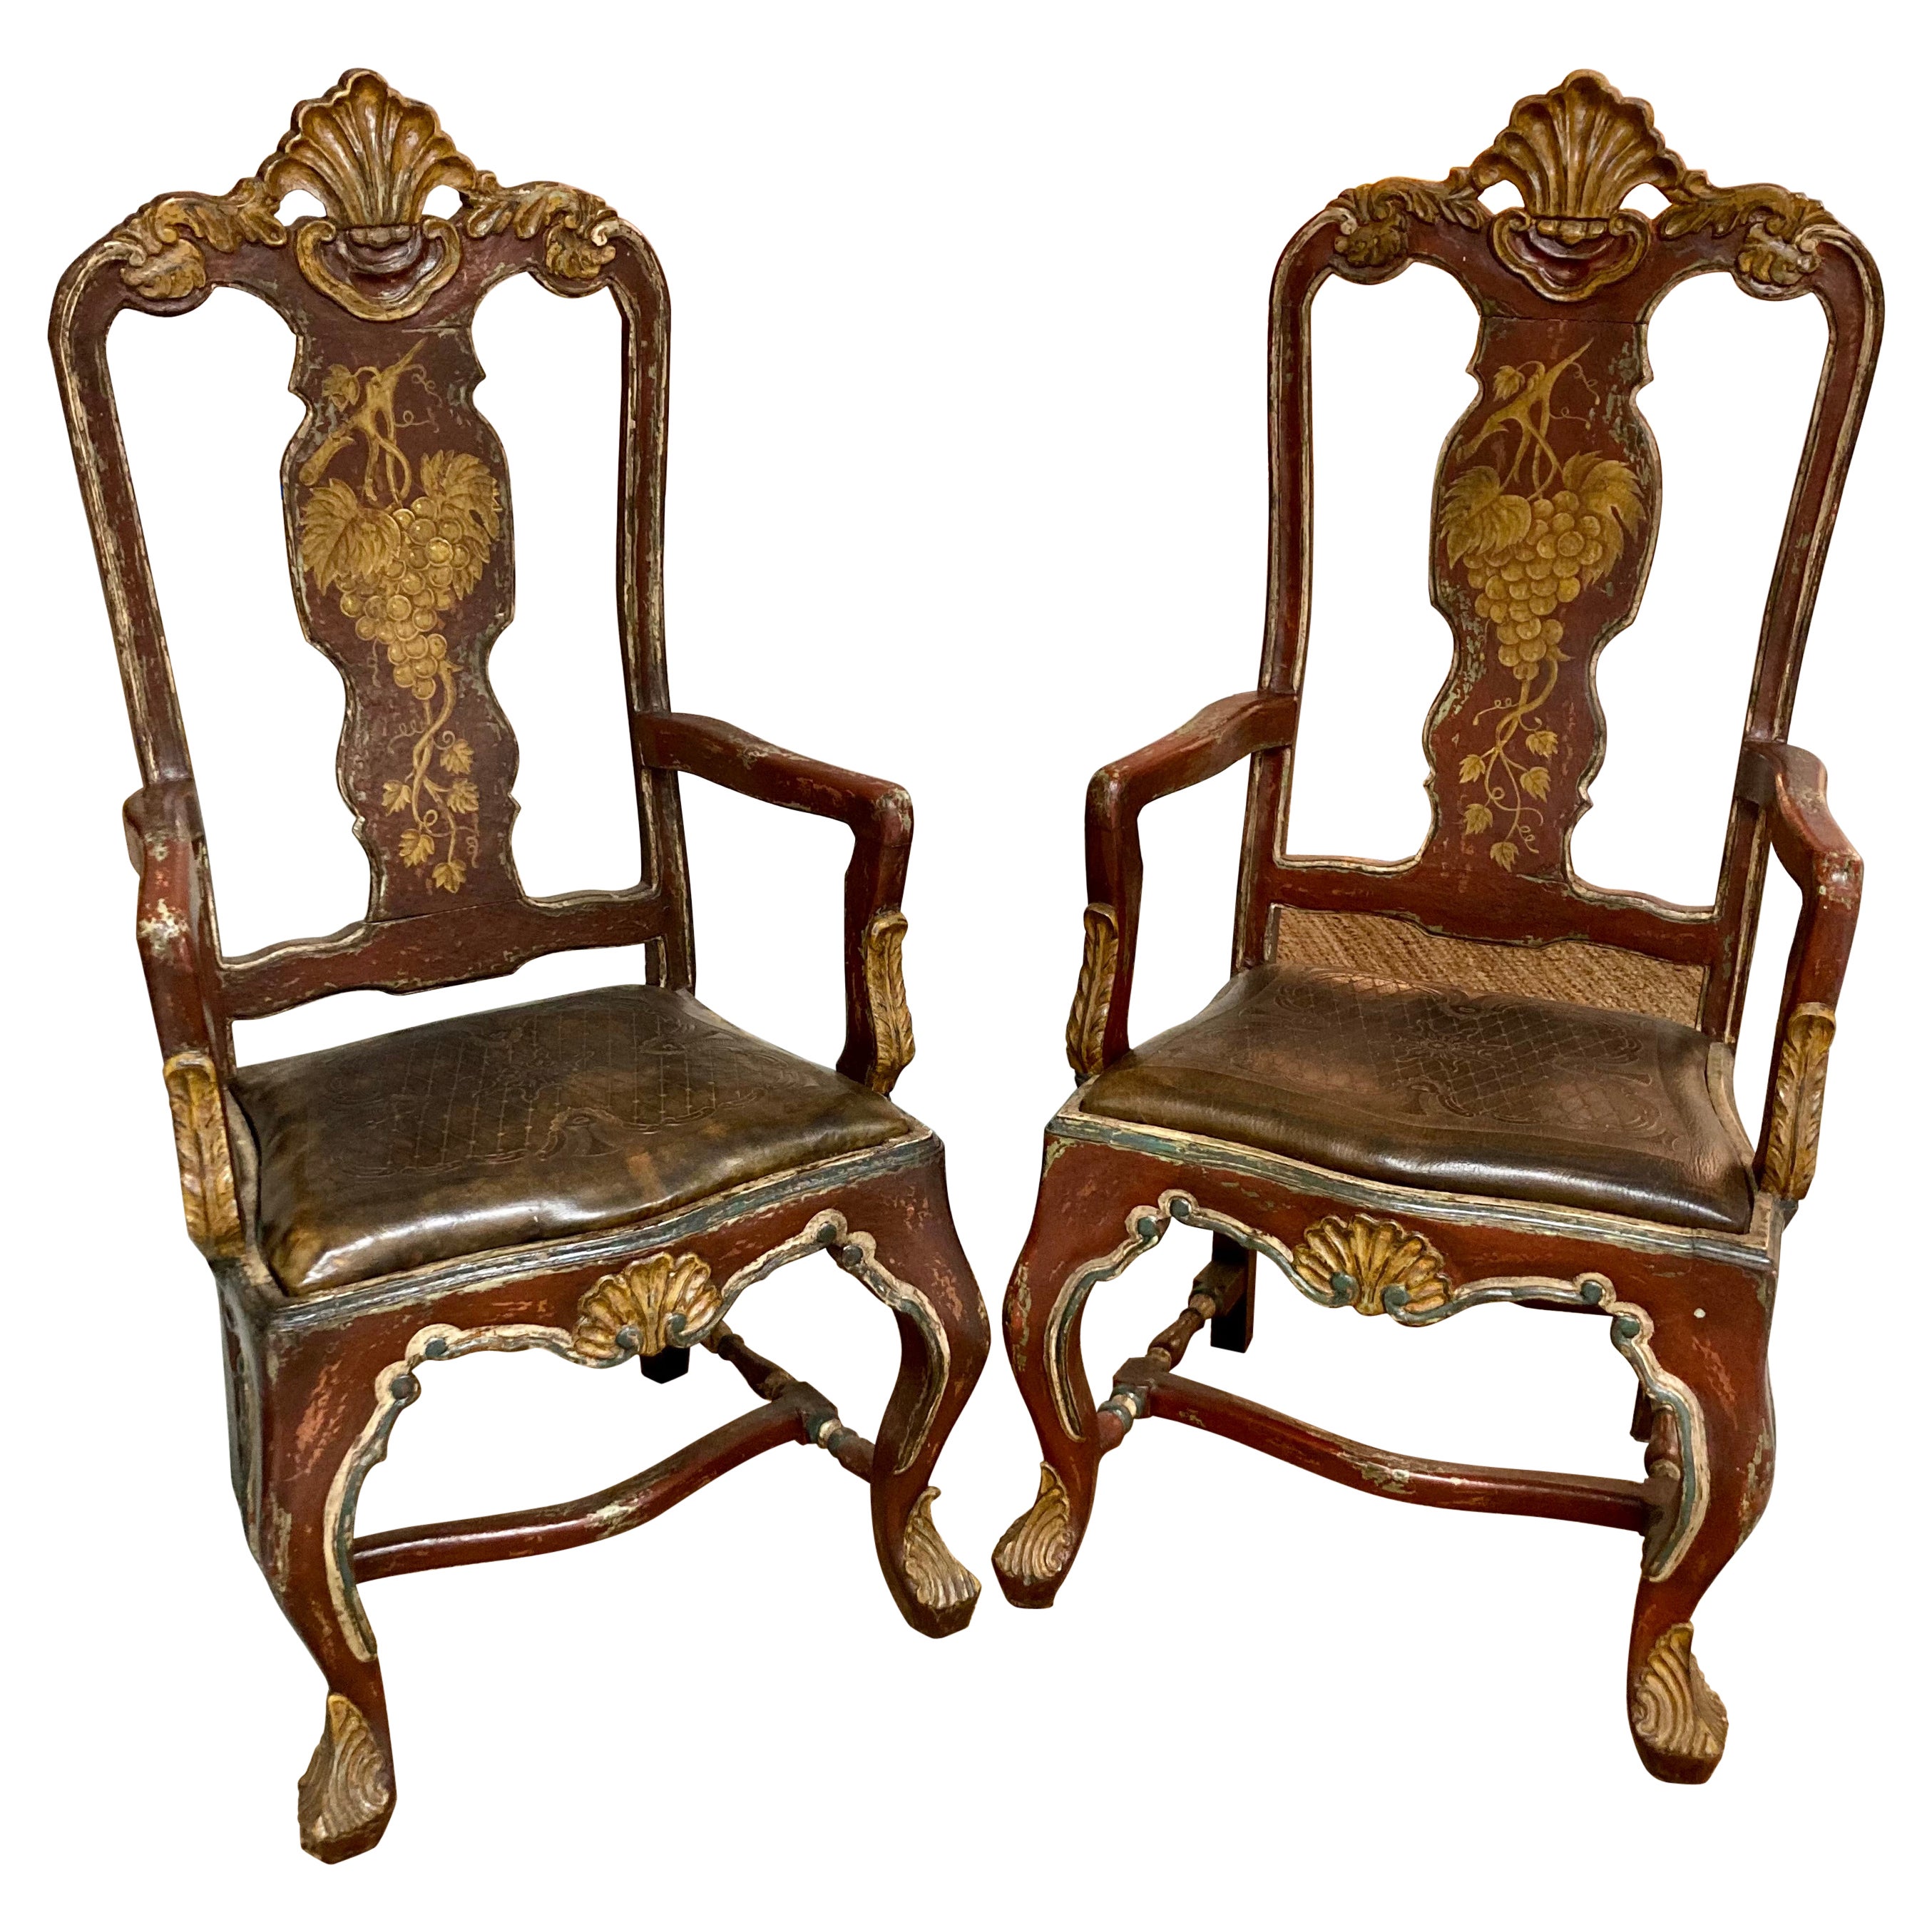 Venetian Arm Chairs With Original Painted Finish and Leather Seats, a Pair For Sale